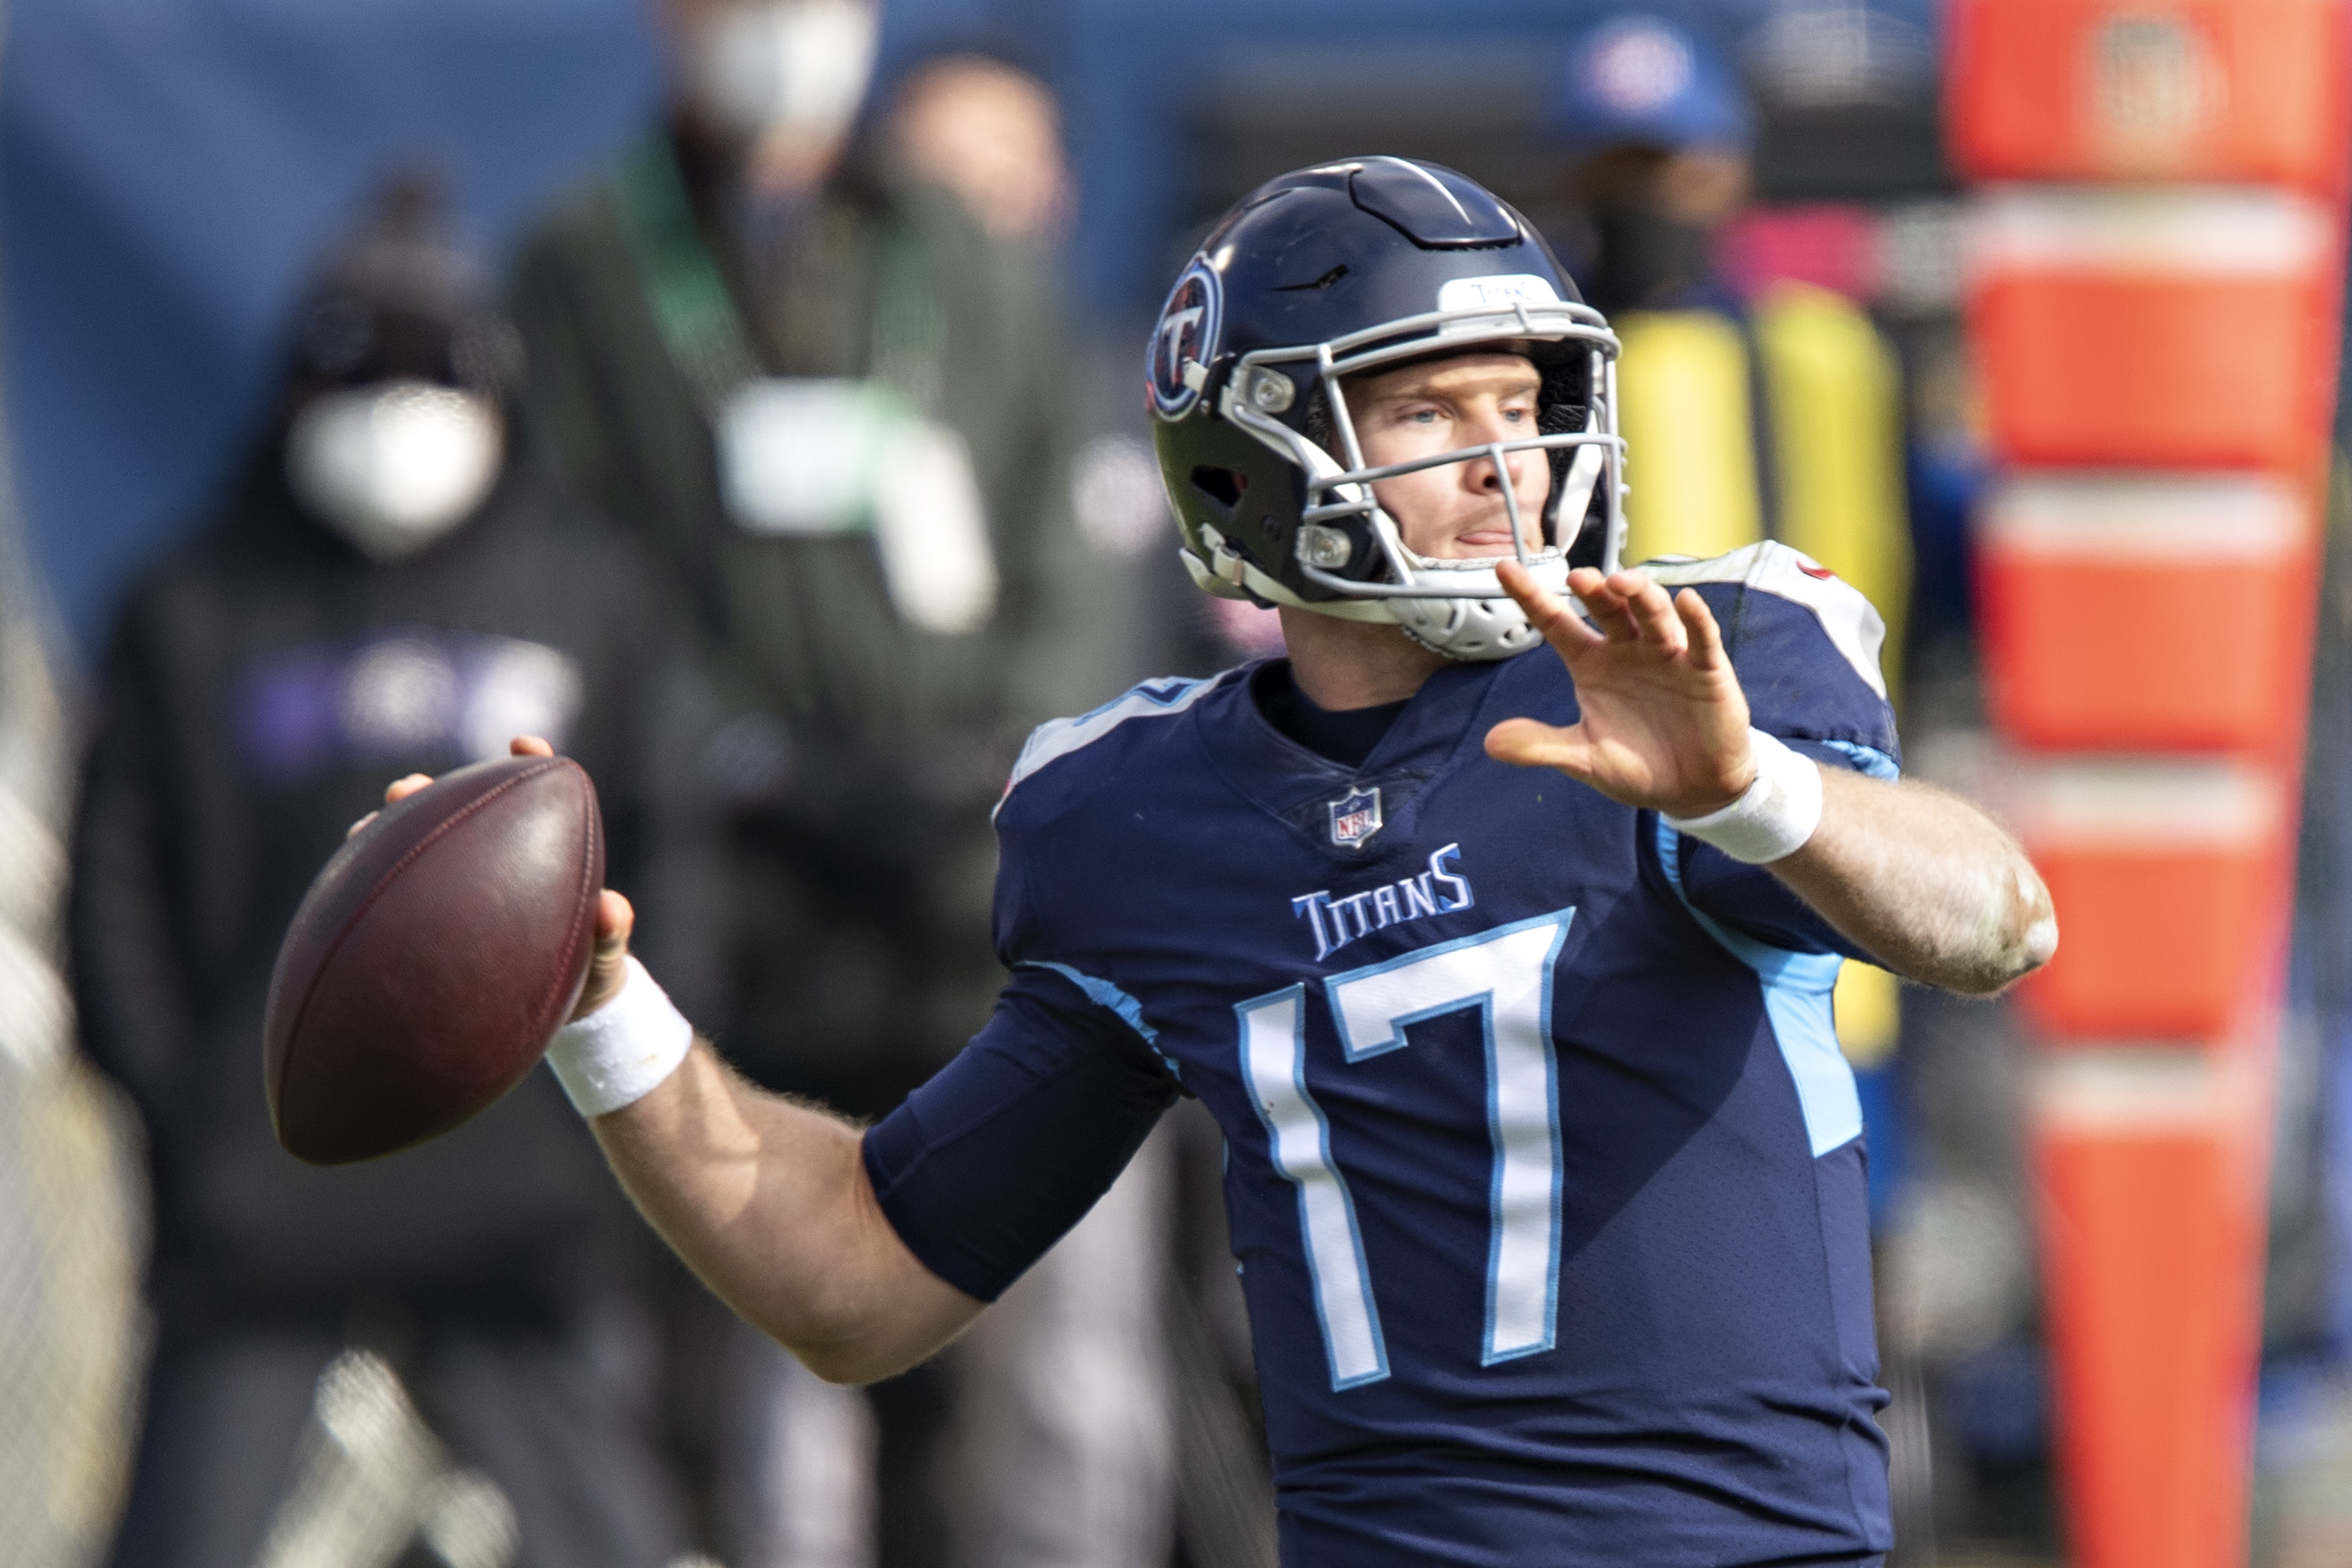 Quarterback Ryan Tannehill #17 of the Tennessee Titans throws a pass during their AFC Wild Card Playoff game against the Baltimore Ravens at Nissan Stadium on January 10, 2021 in Nashville, Tennessee. The Ravens defeated the Titans 20-13.